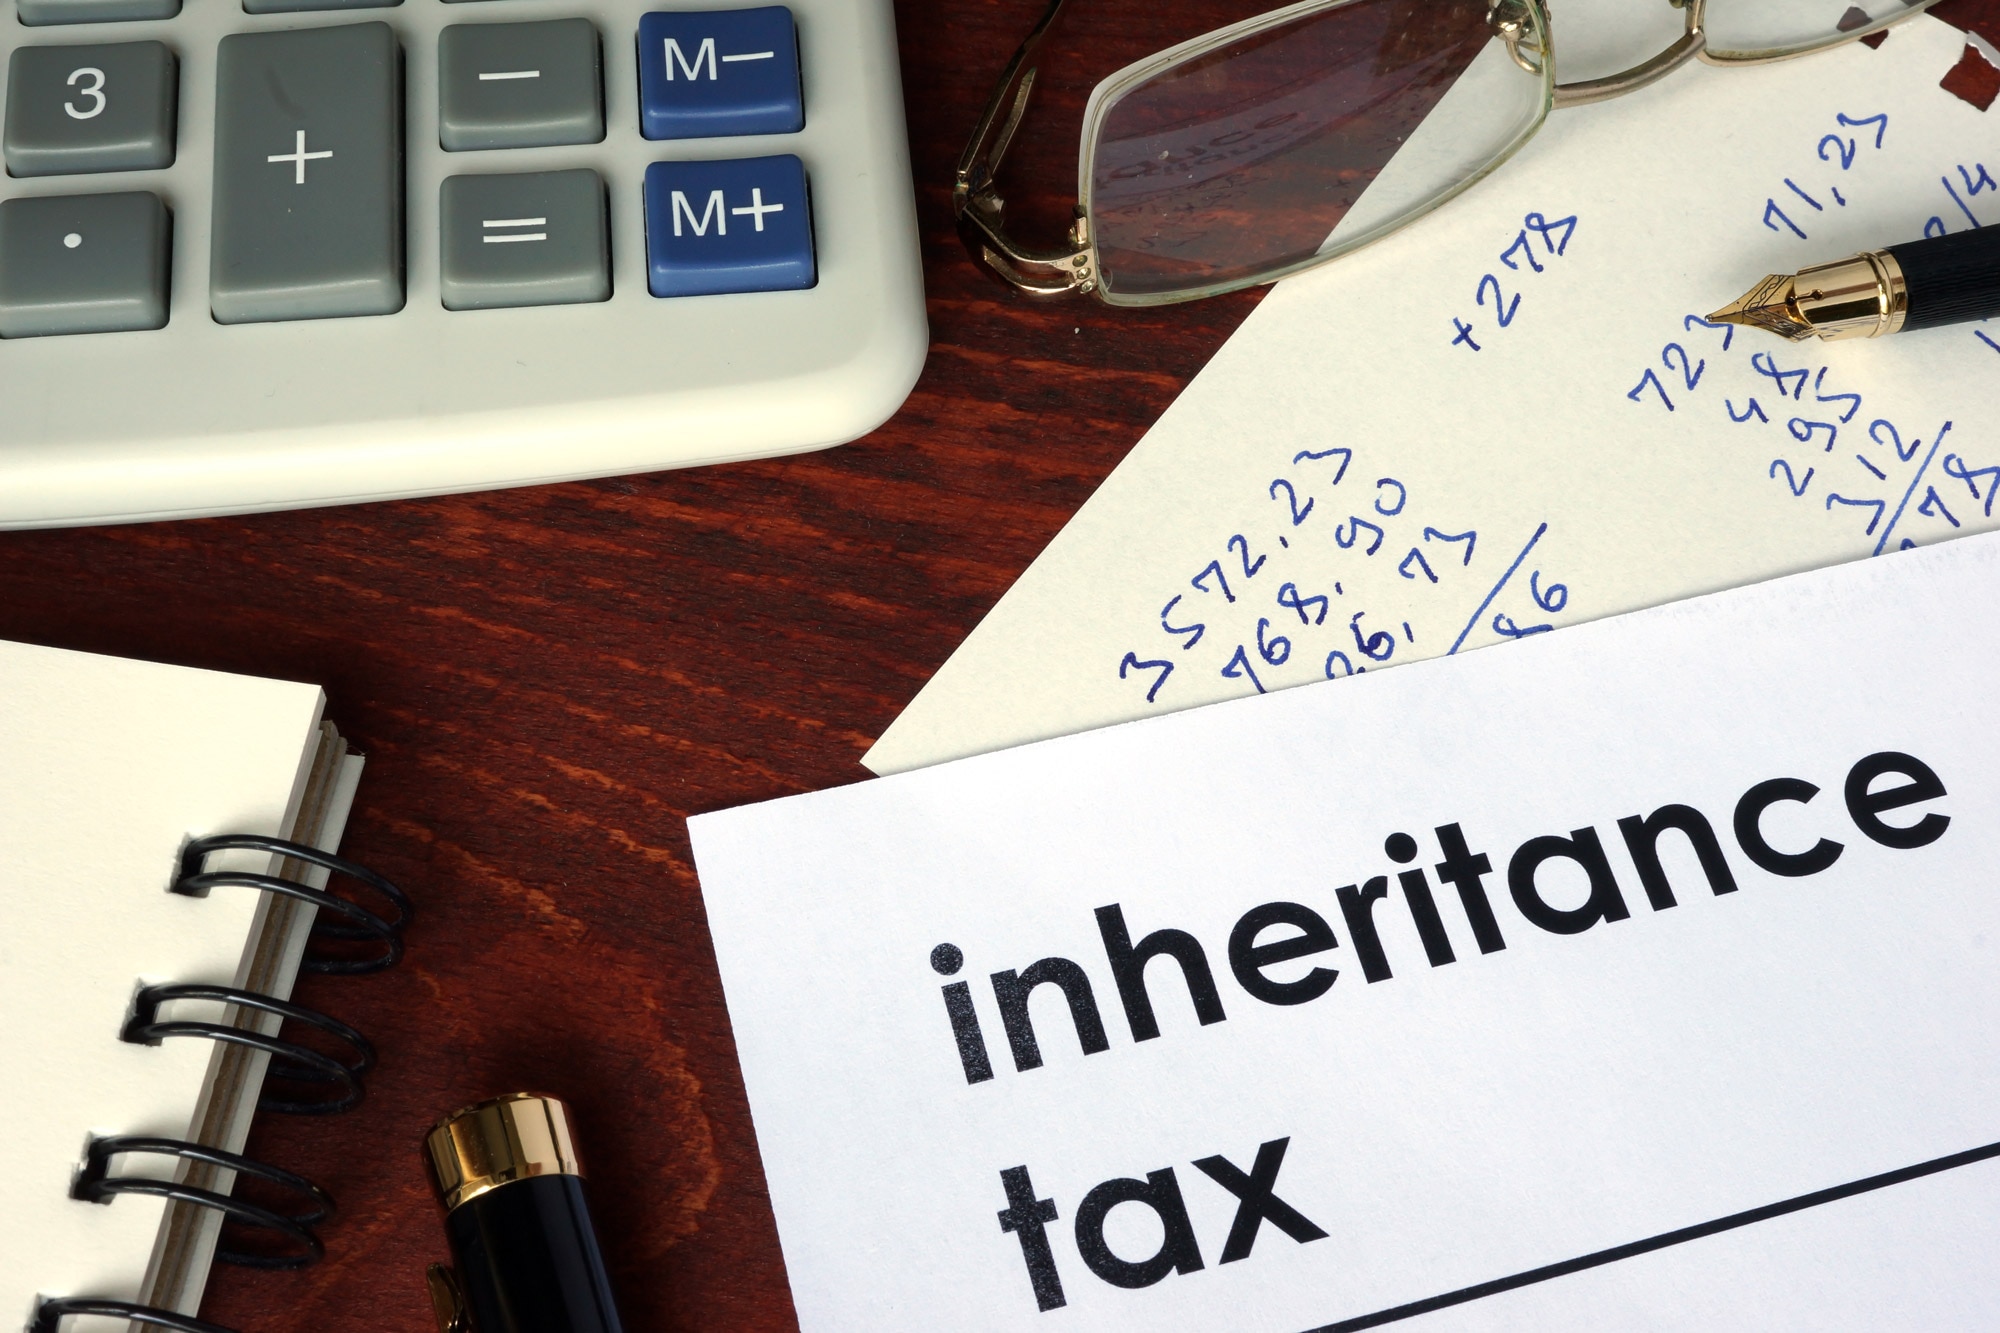 A table with glasses, pen, calculator and numbers depicting calculations for inheritance tax